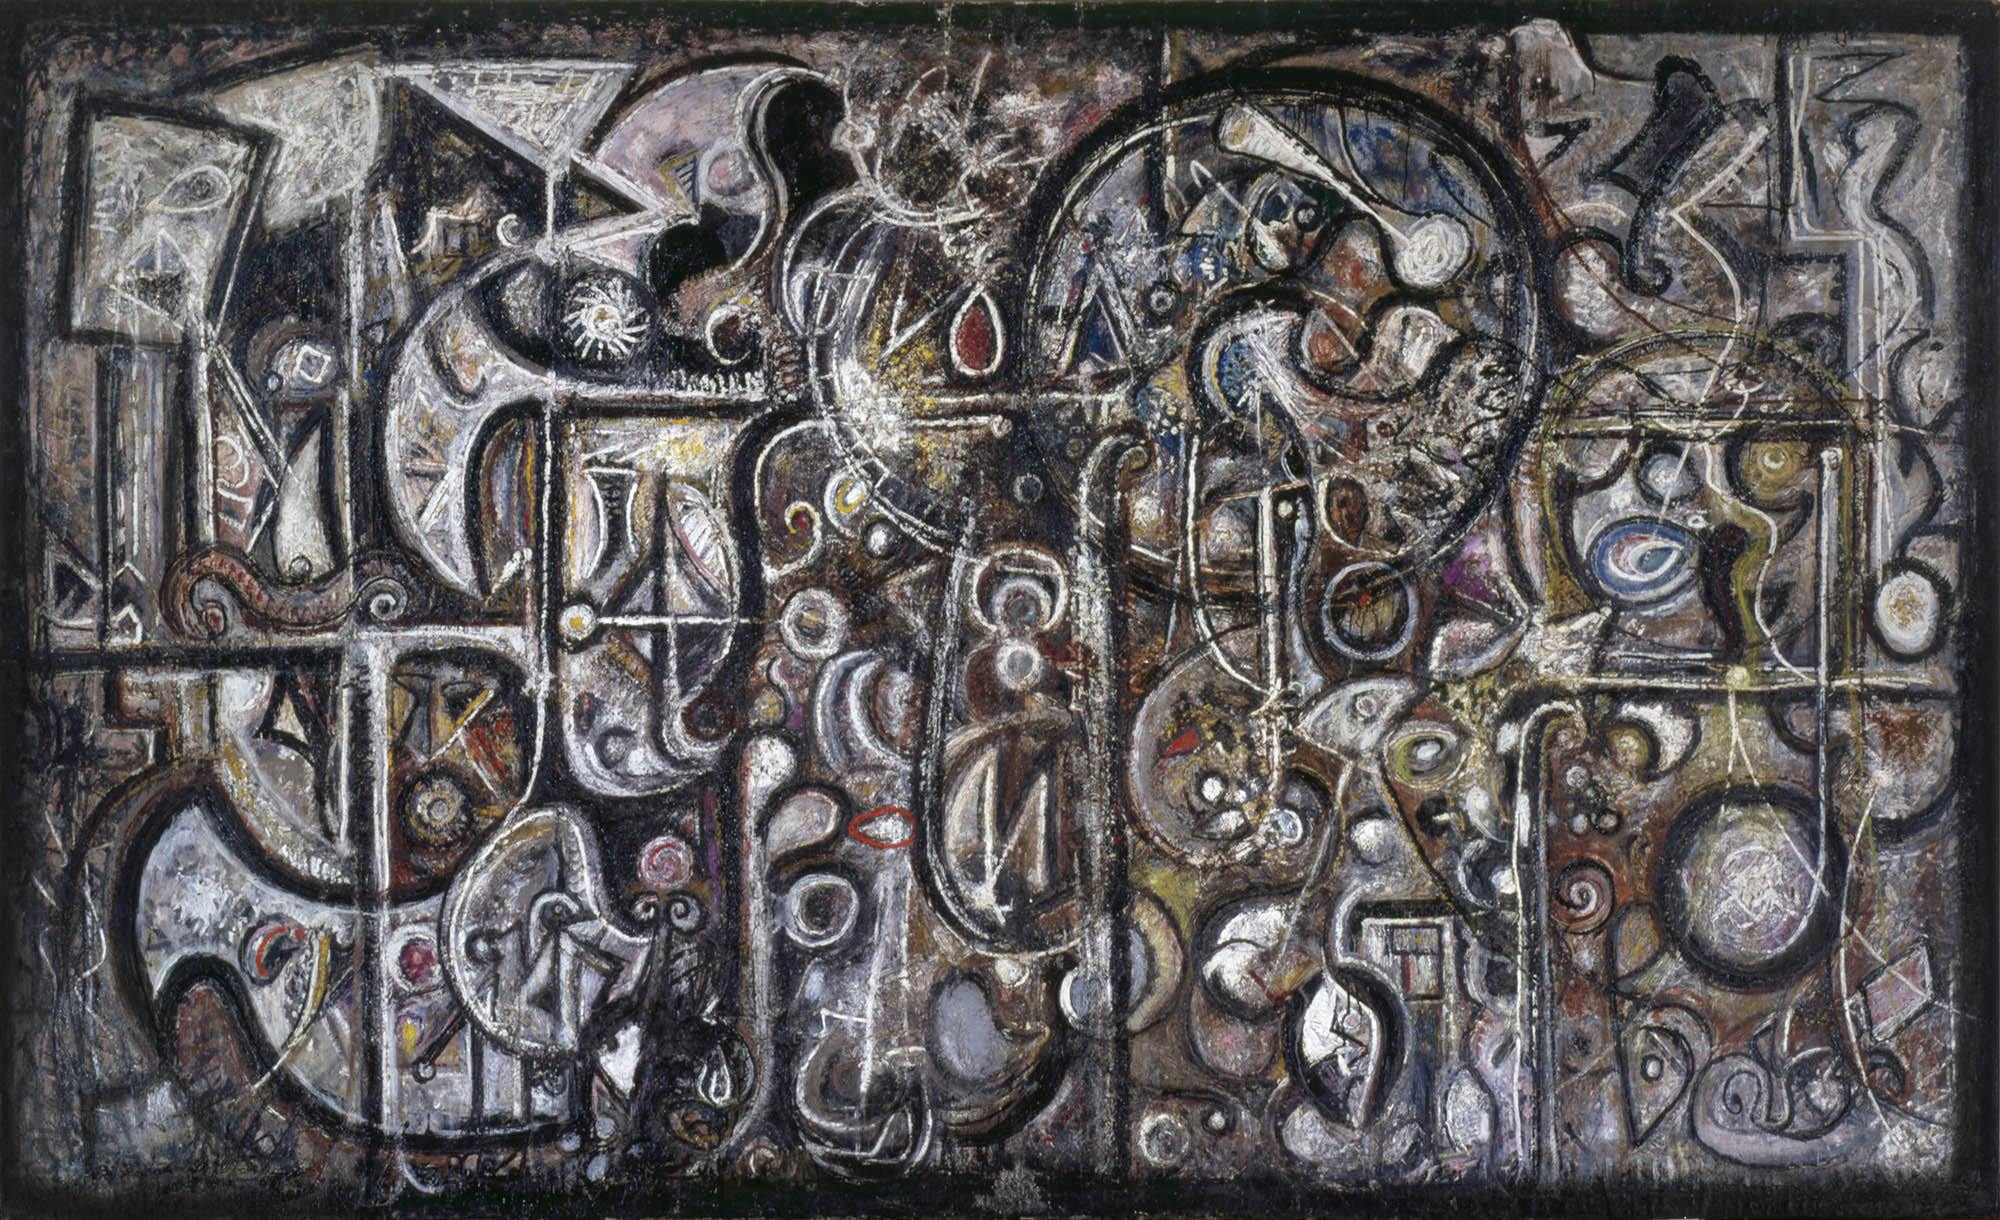 _Symphony Number 1, The Transcendental,_ 1941–42, oil on canvas, 86 x 140 ½ in. (218.4 x 356.9 cm). The Metropolitan Museum of Art, New York, Purchase, Lila Acheson Wallace Gift (1996.367)
 – The Richard Pousette-Dart Foundation